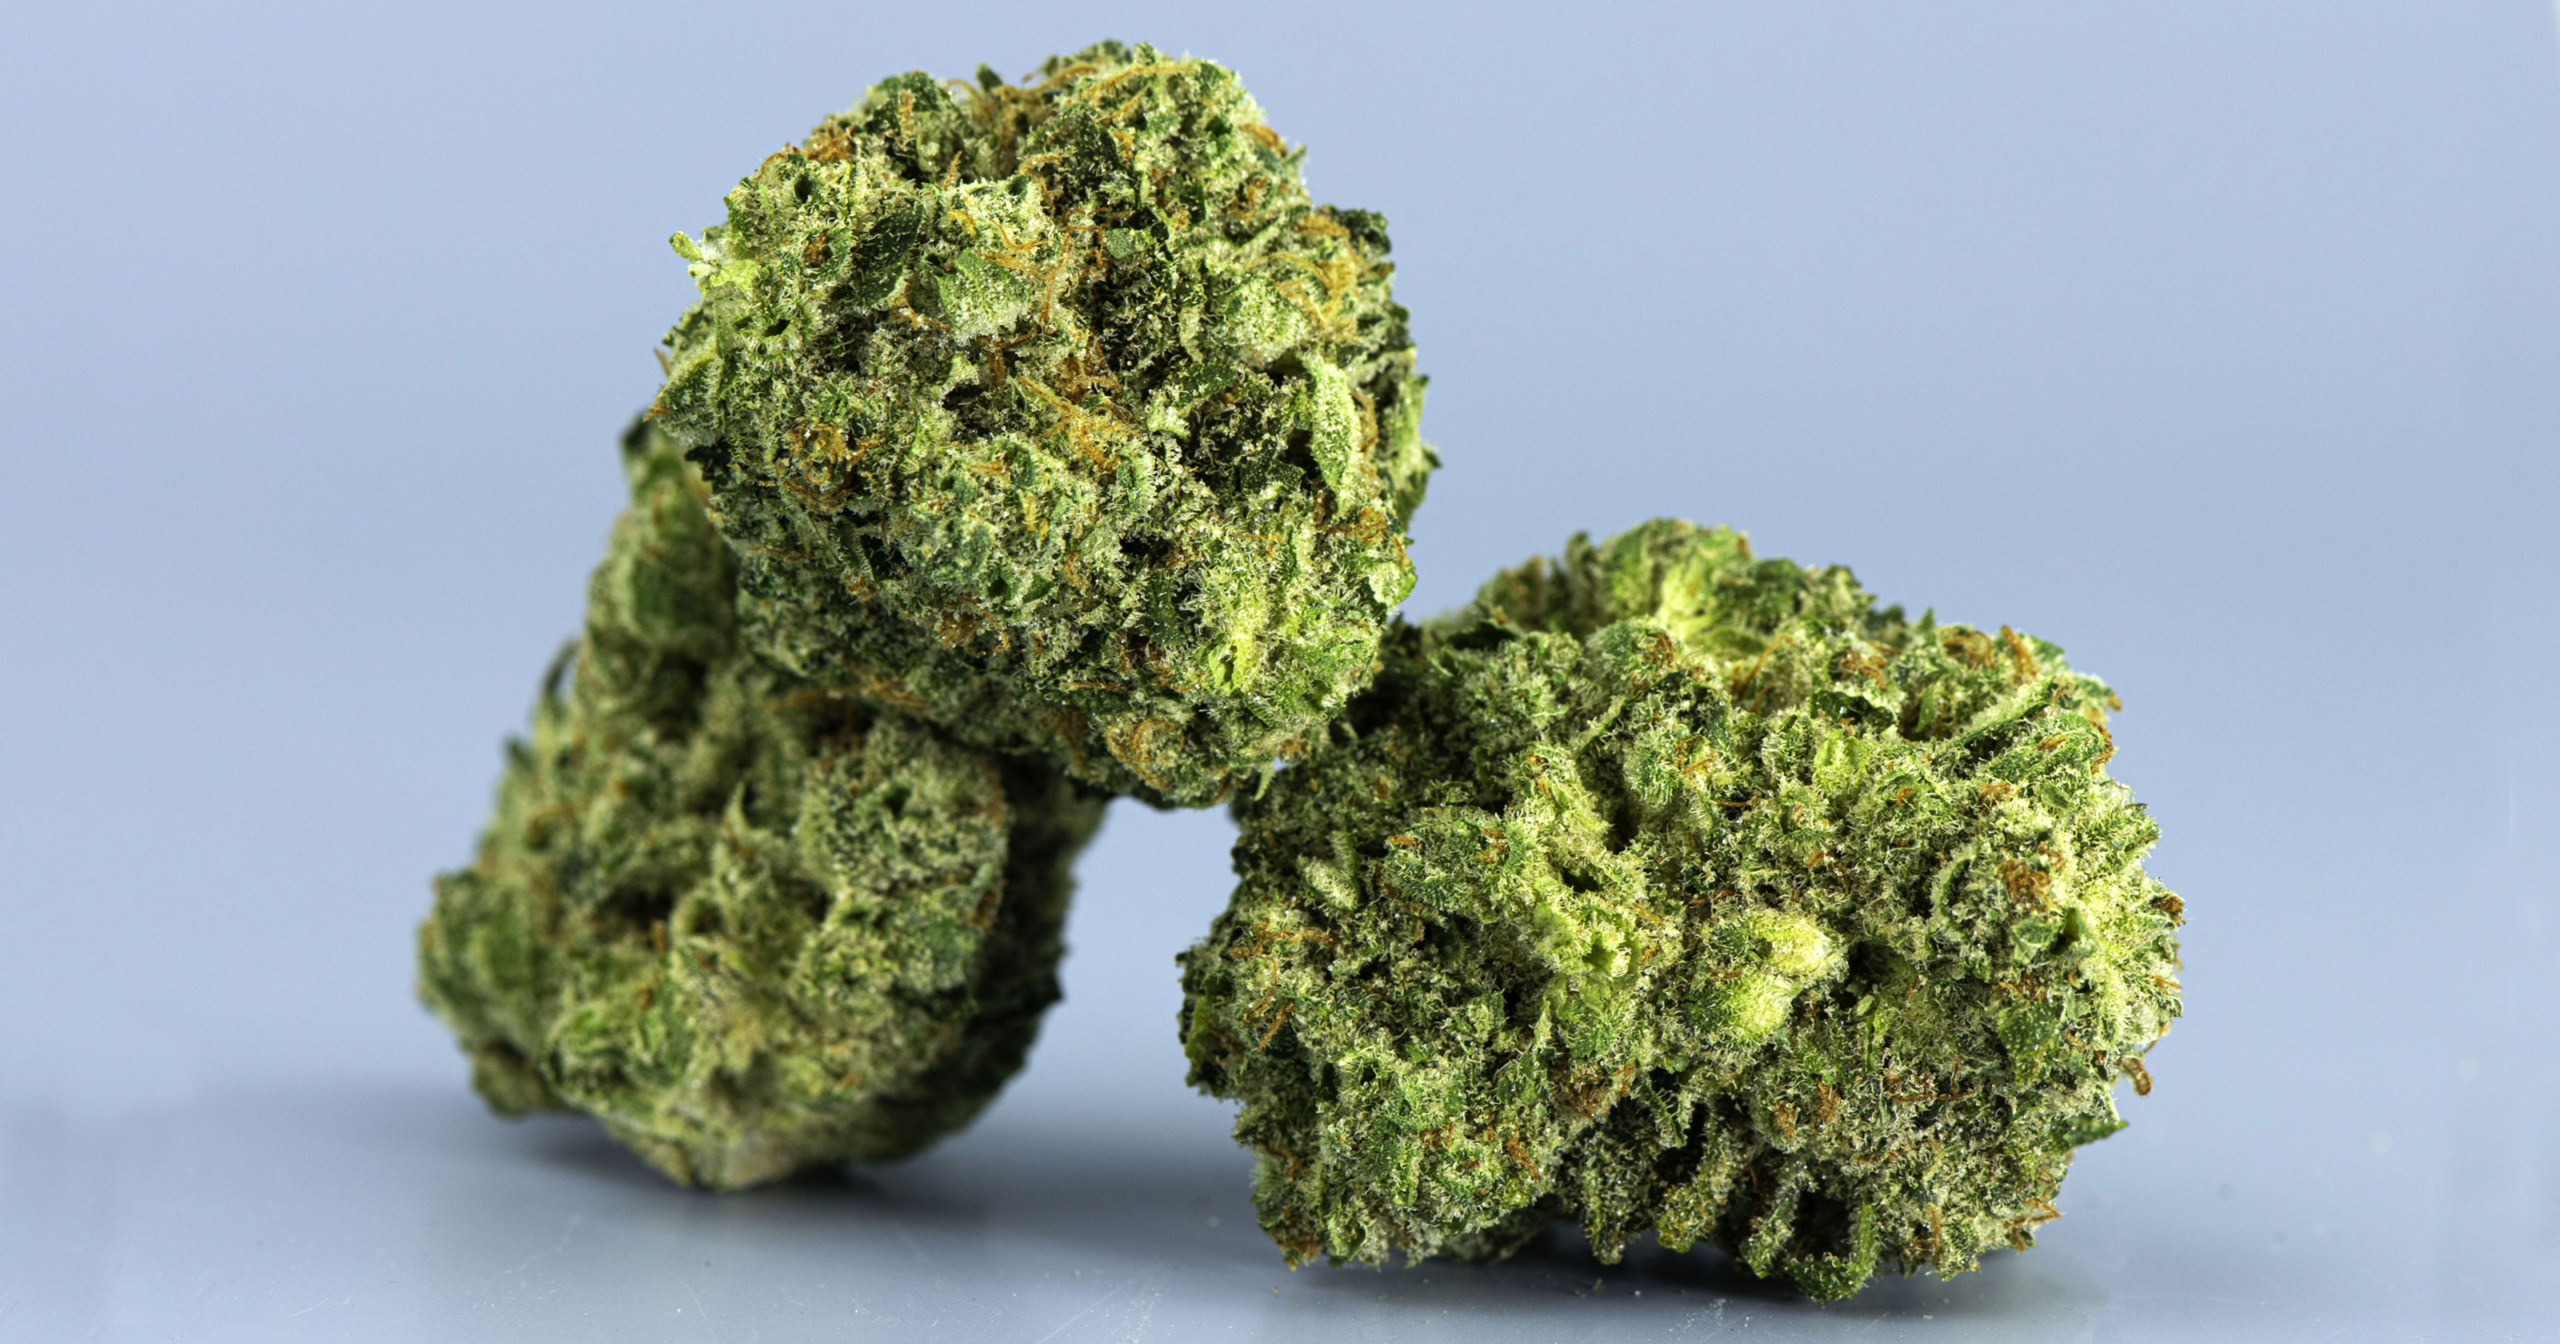 What Are Trichomes and What Do They Do?